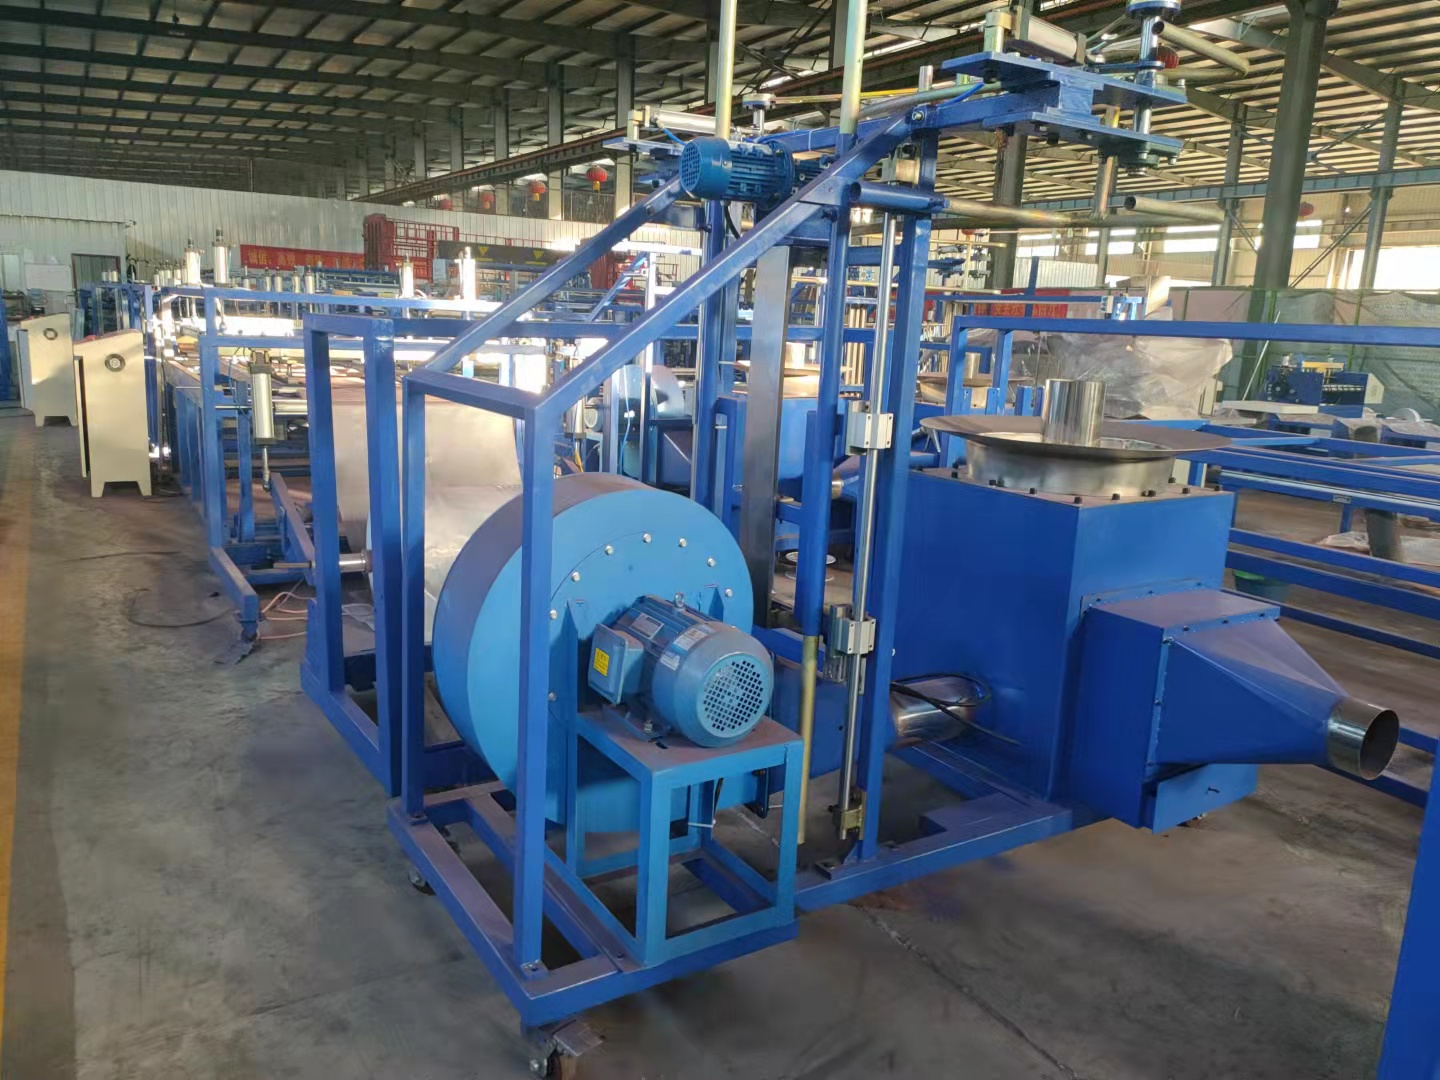 China Fibc Bags Air Washer Electric Fibc Bag Cleaning Machine factory and manufacturers | VYT Featured Image